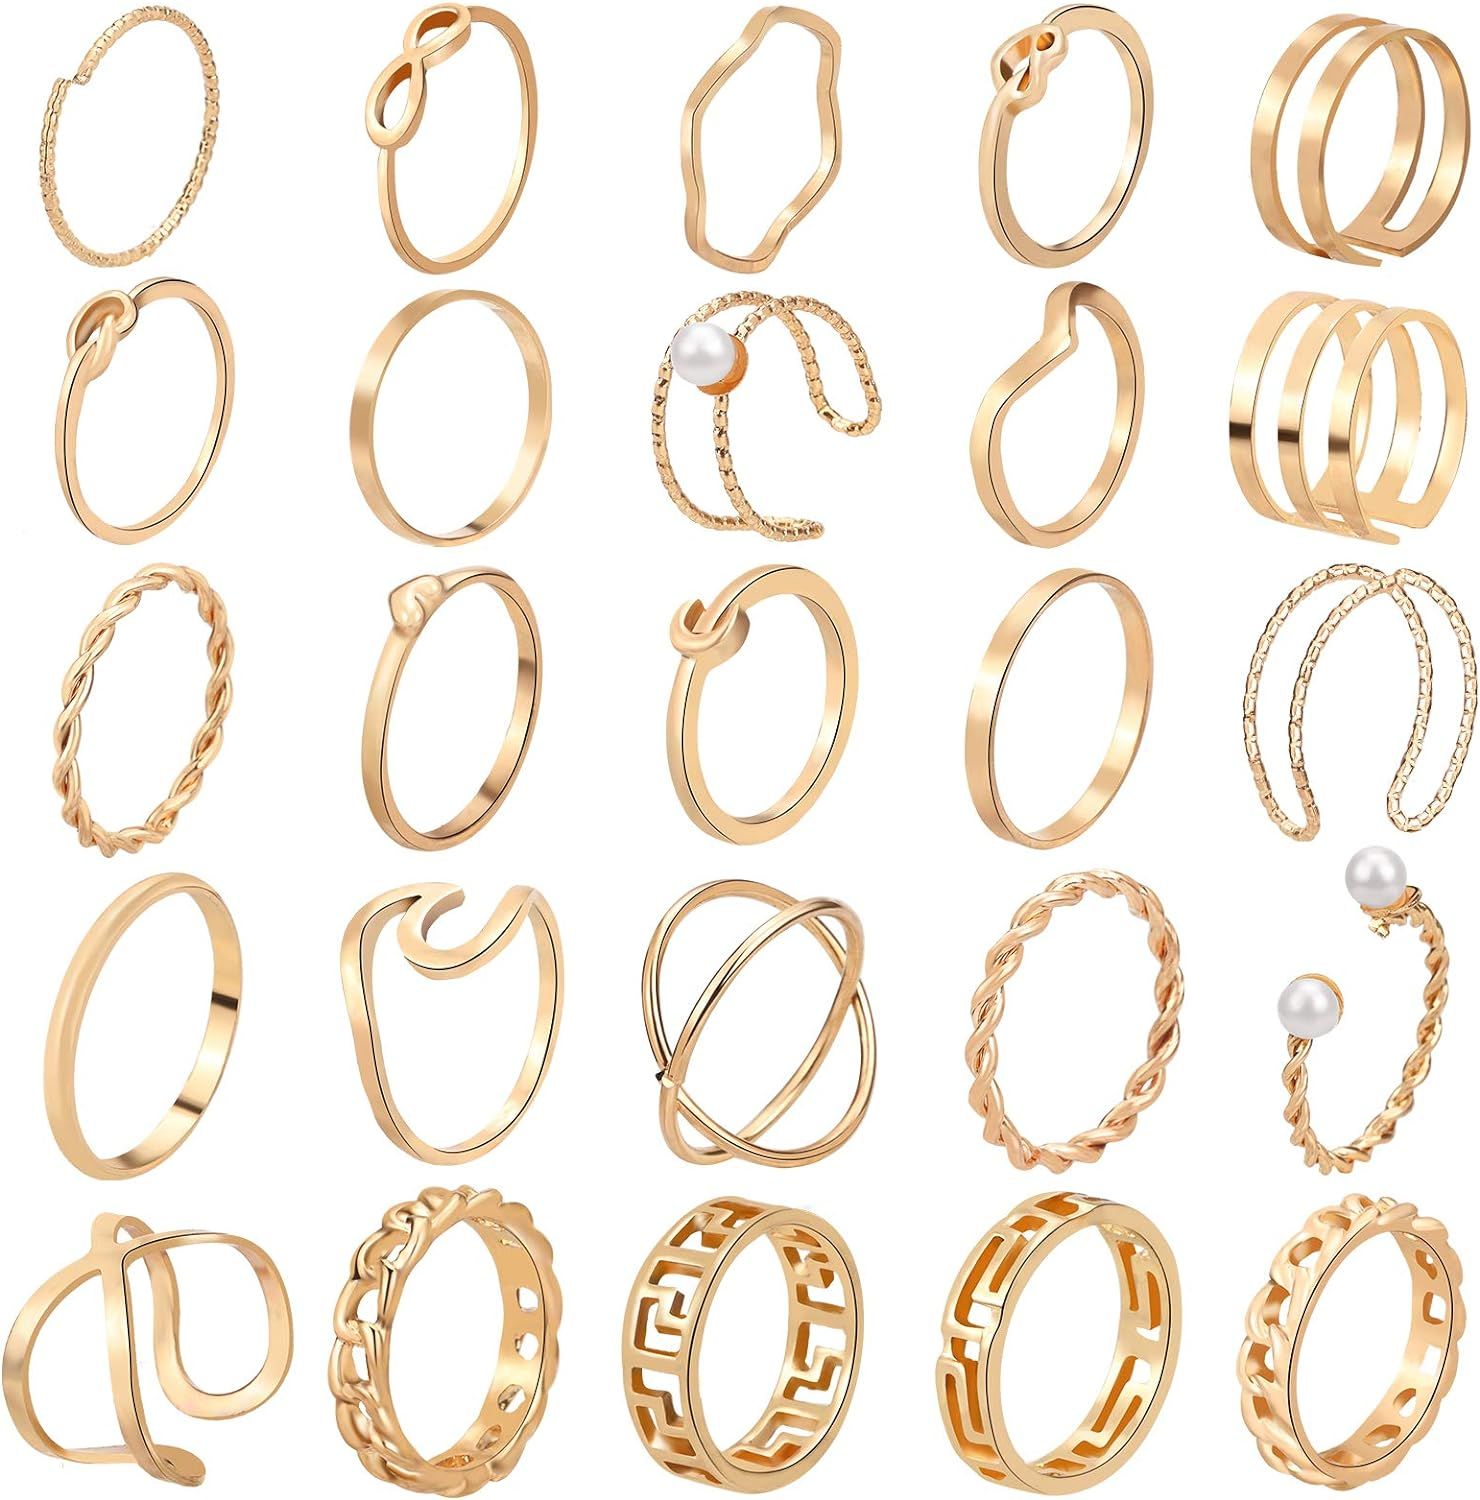 ONESING 25-120 Pcs Knuckle Rings for Women Stackable Rings Set Girls Bohemian Retro Vintage Joint Fi | Amazon (CA)